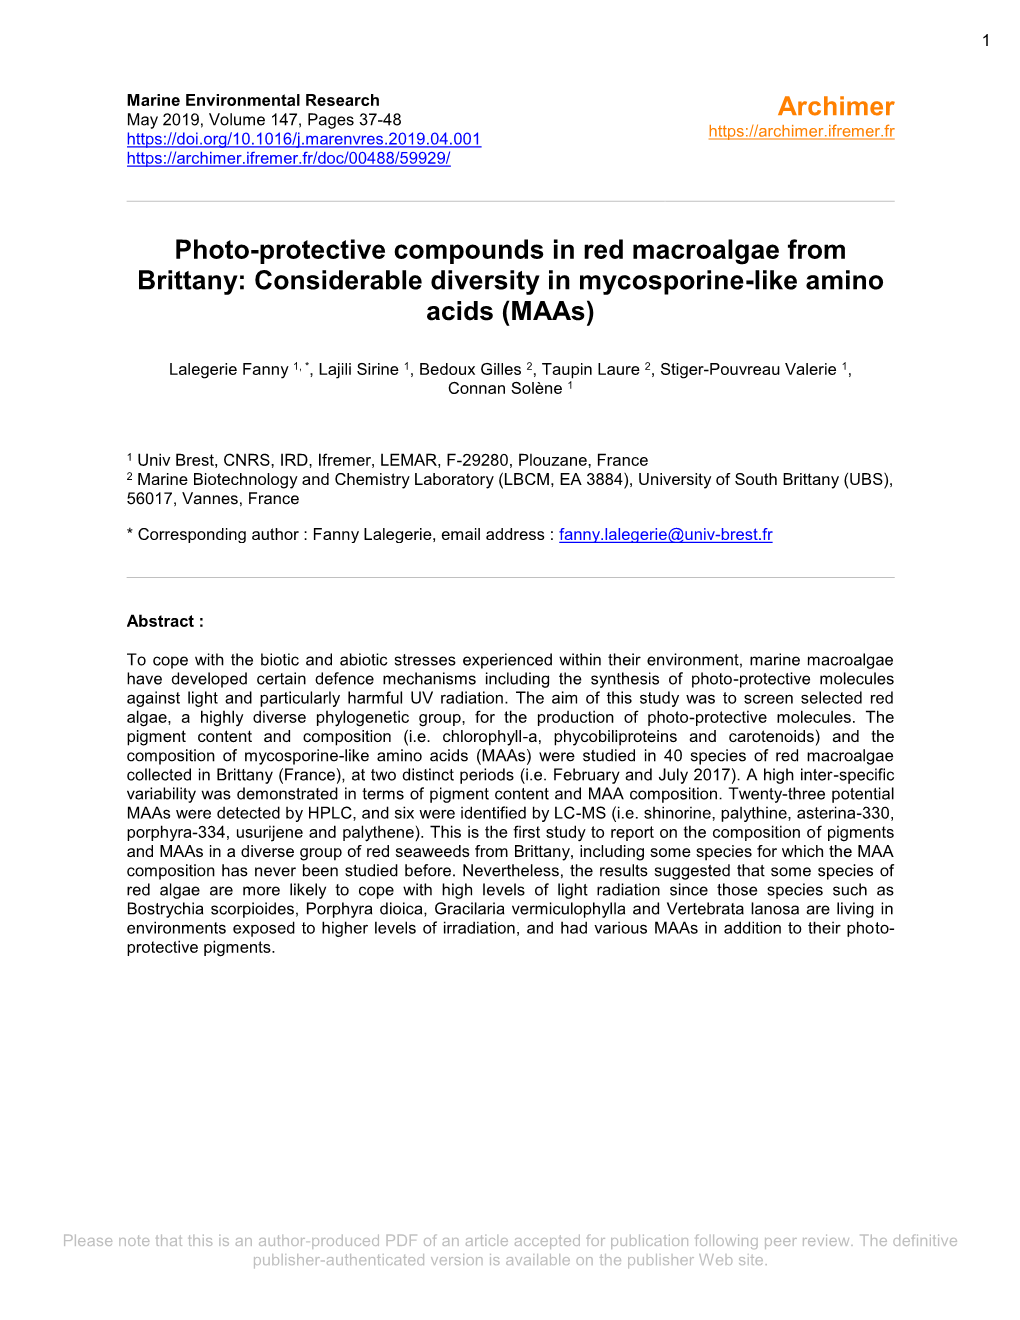 Photo-Protective Compounds in Red Macroalgae from Brittany: Considerable Diversity in Mycosporine-Like Amino Acids (Maas)